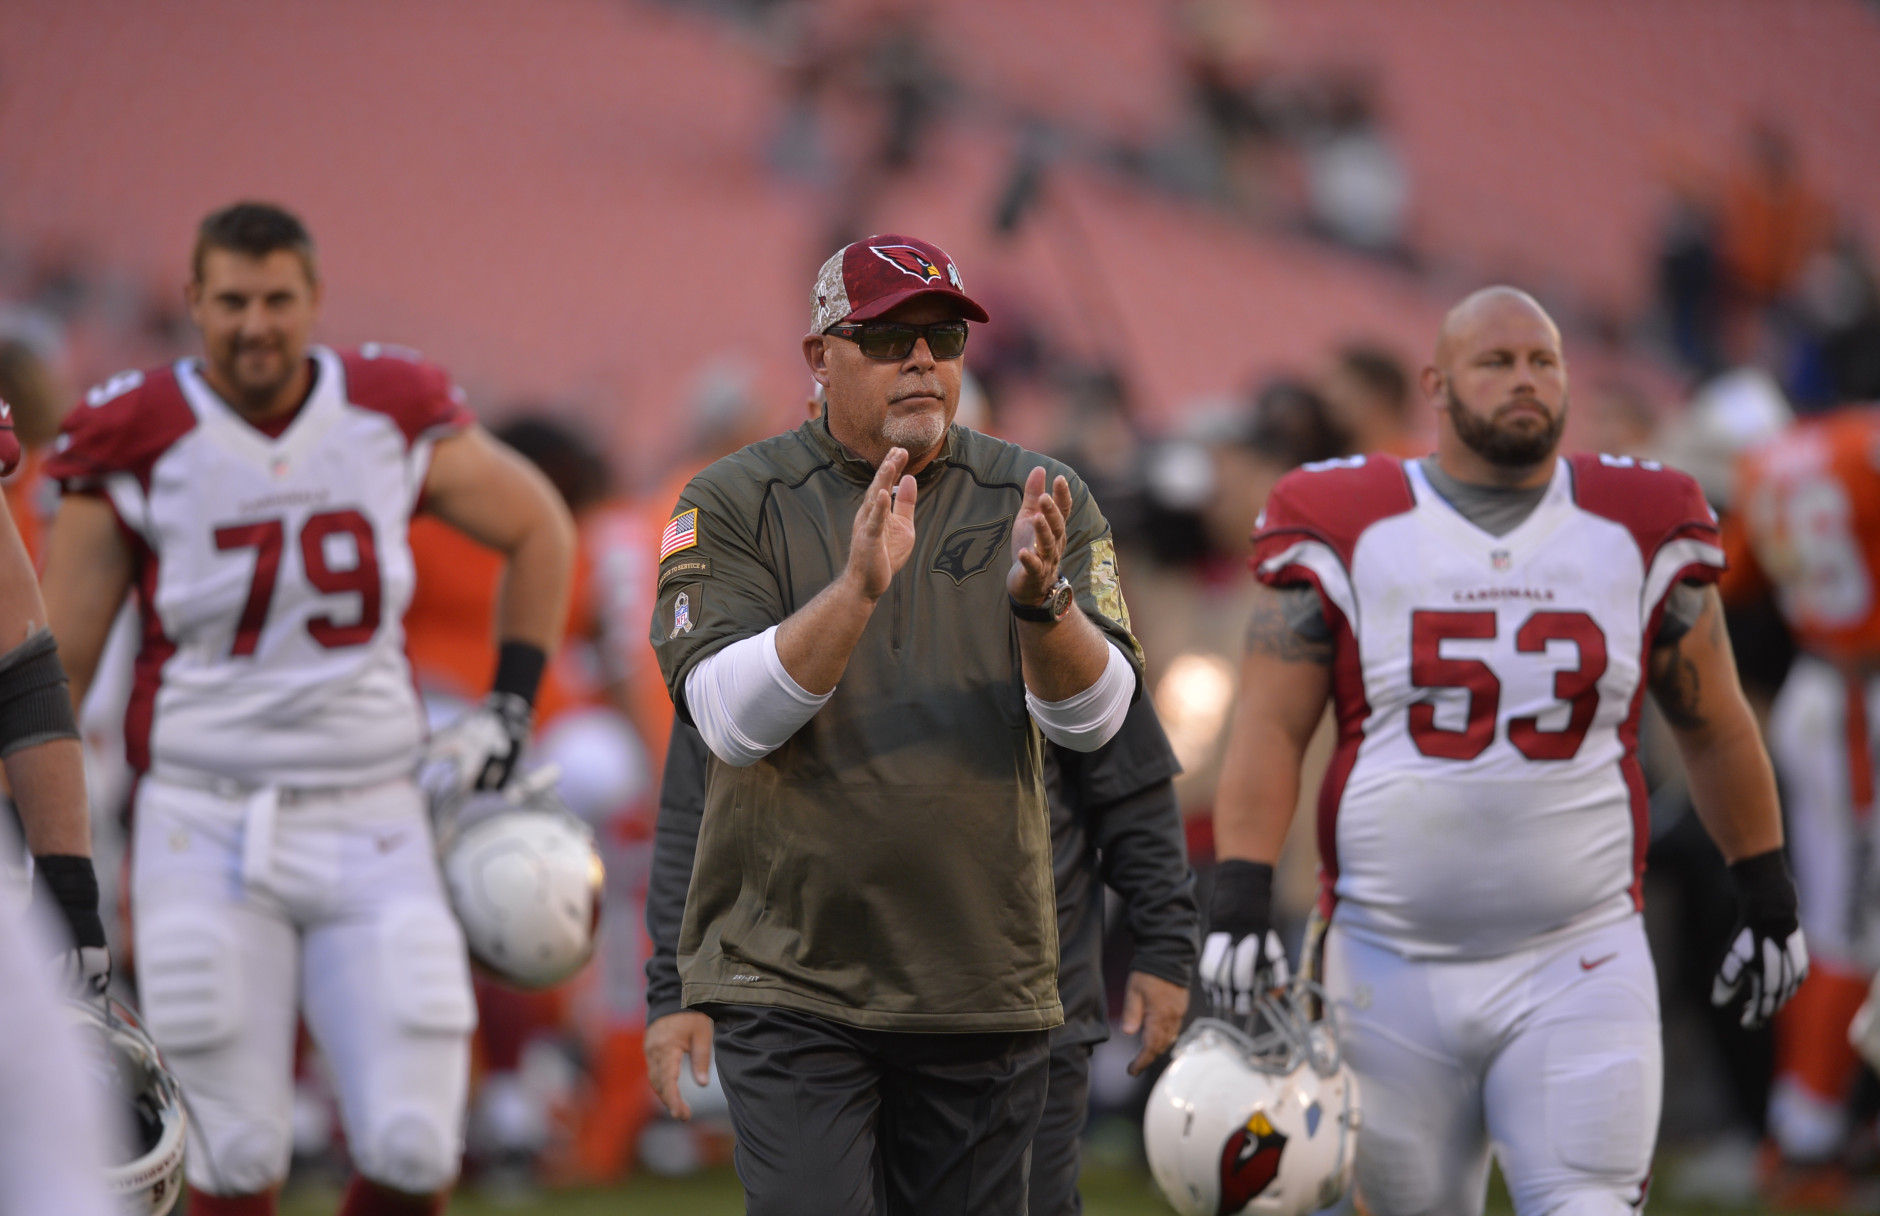 Arizona Cardinals head coach Bruce Arians celebrates after the Cardinals defeated the Cleveland Browns 34-20 in an NFL football game Sunday, Nov. 1, 2015, in Cleveland. (AP Photo/David Richard)